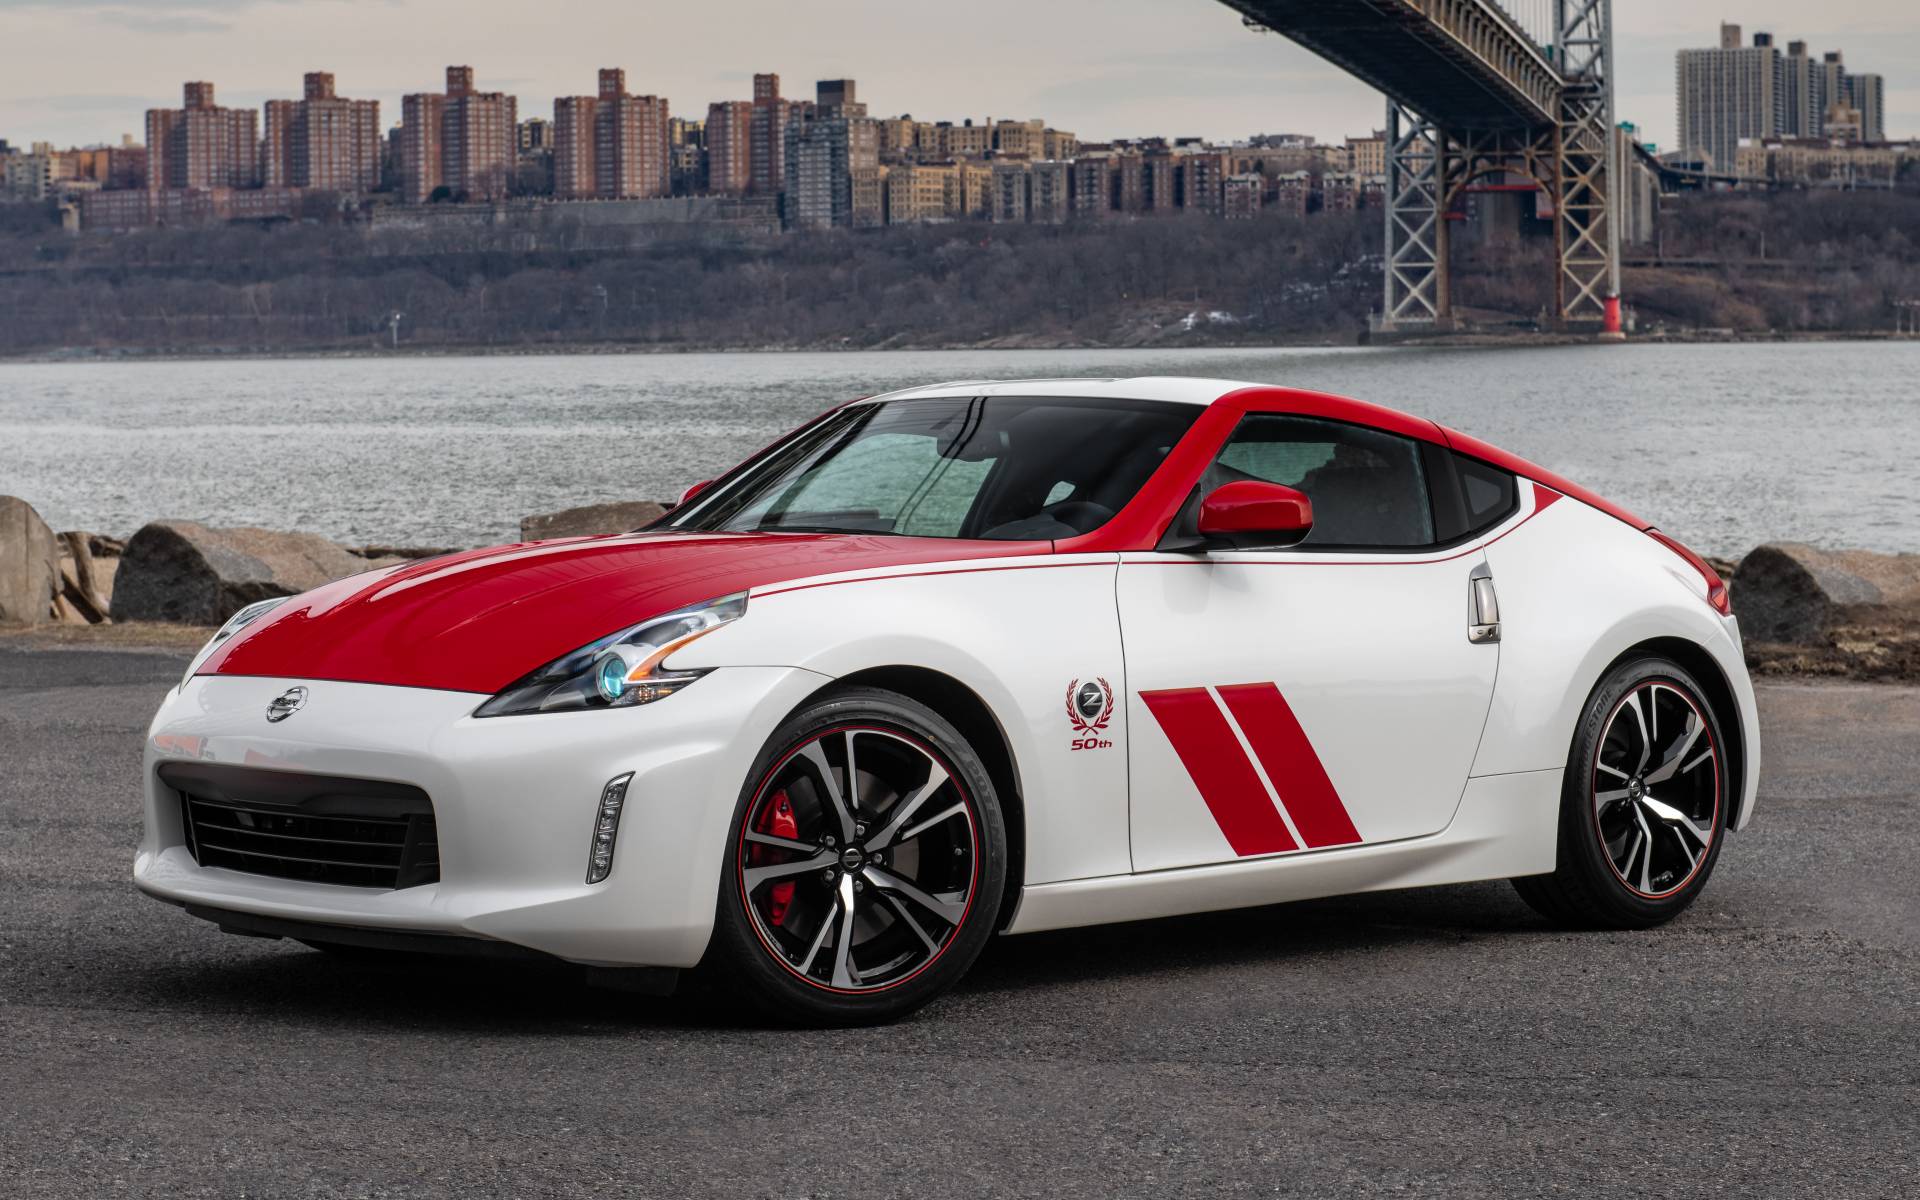 2020 Nissan 370z News Reviews Picture Galleries And